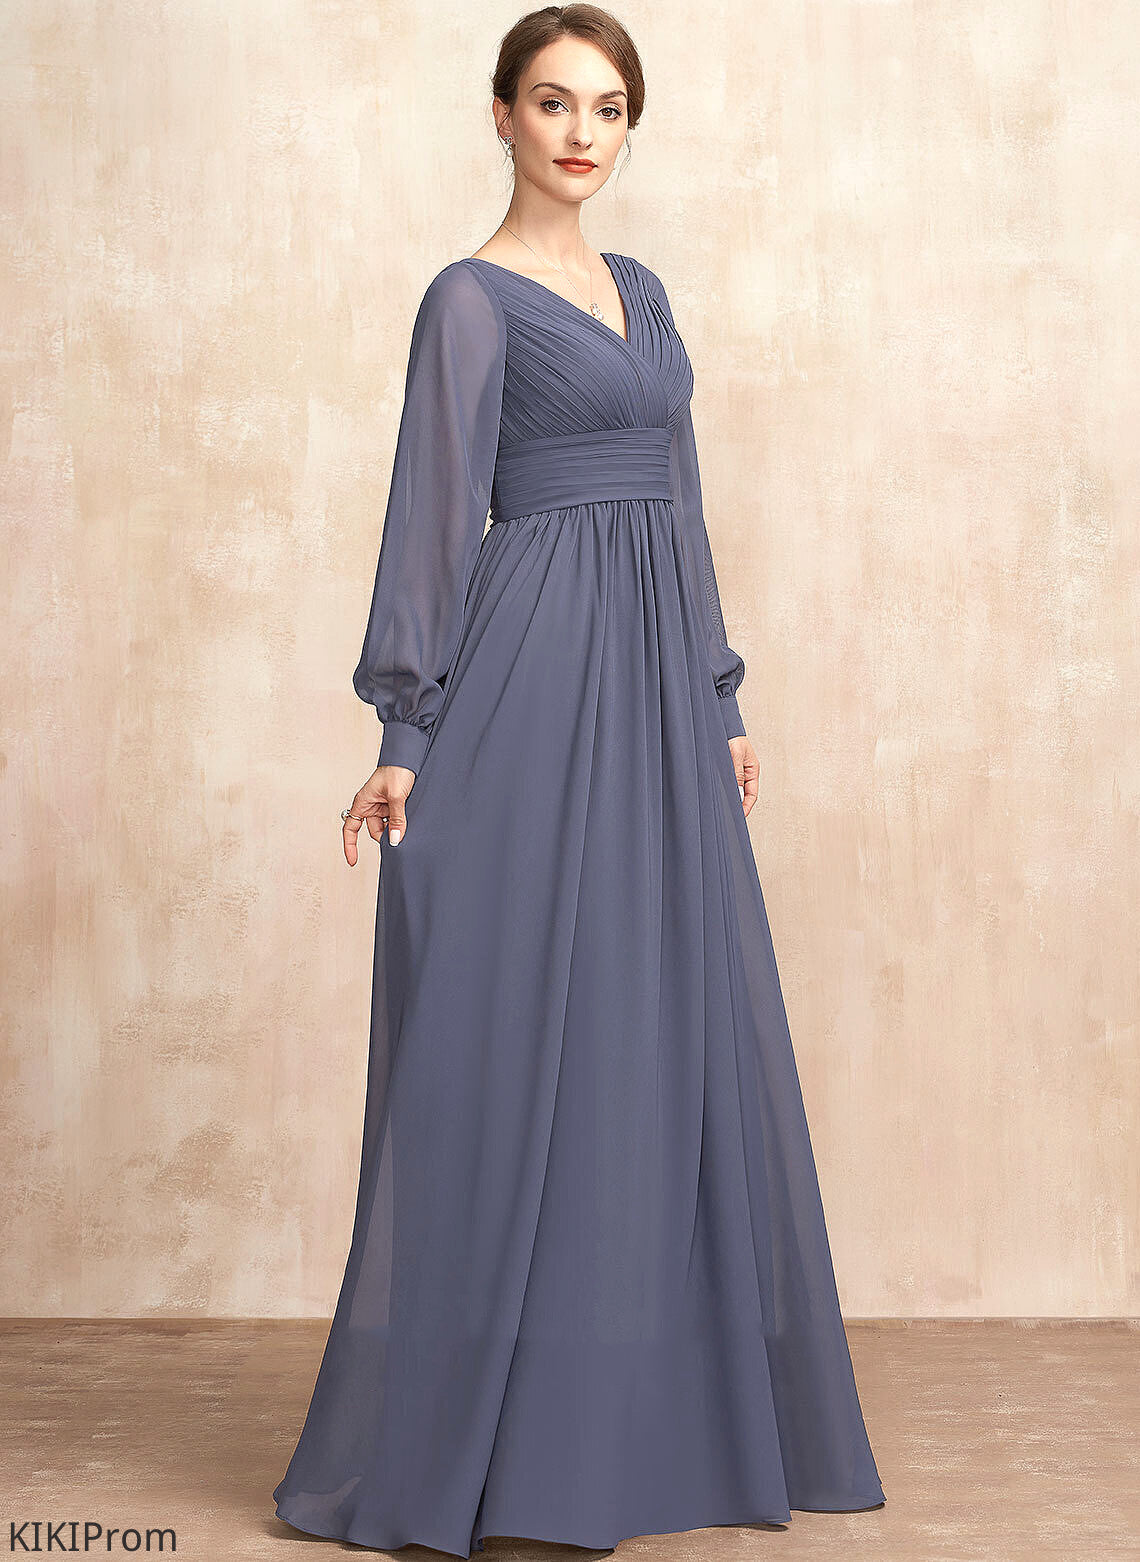 Chiffon of A-Line Dress V-neck Bride the Mother of the Bride Dresses With Ruffle Floor-Length Jeanie Mother